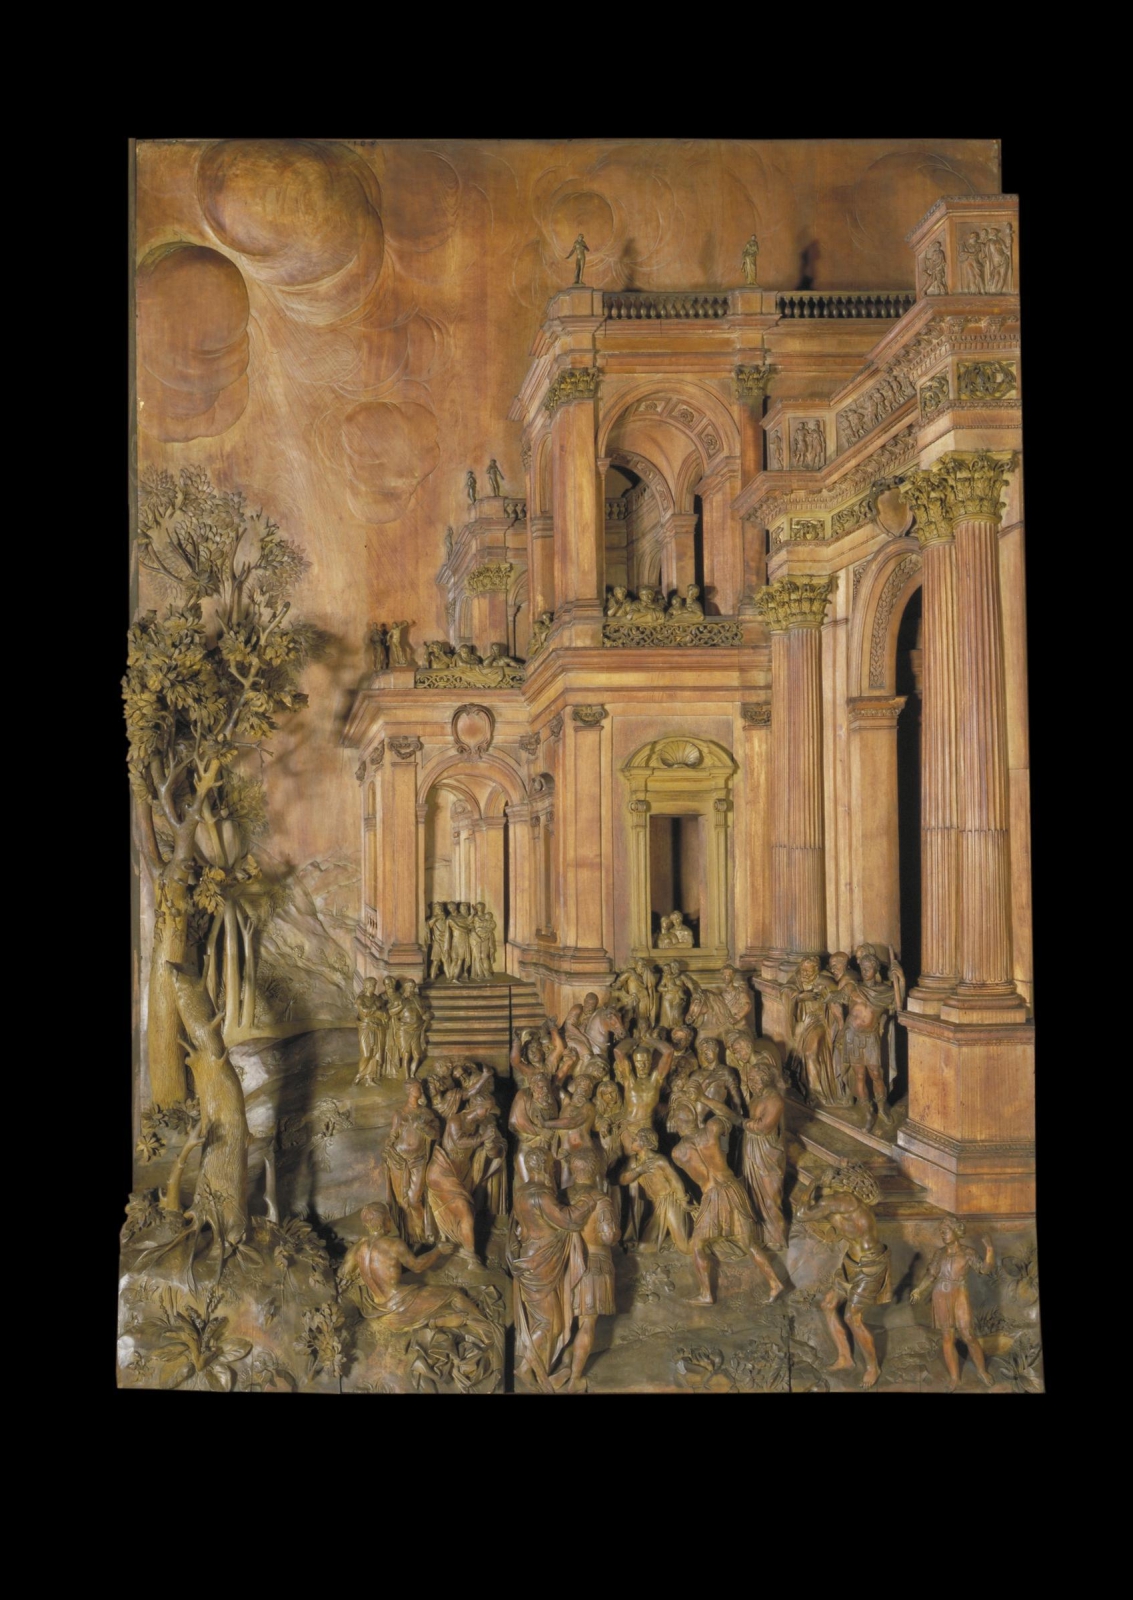 photo of Stoning of St Stephen panel - with permission from Victoria & Albert Museum